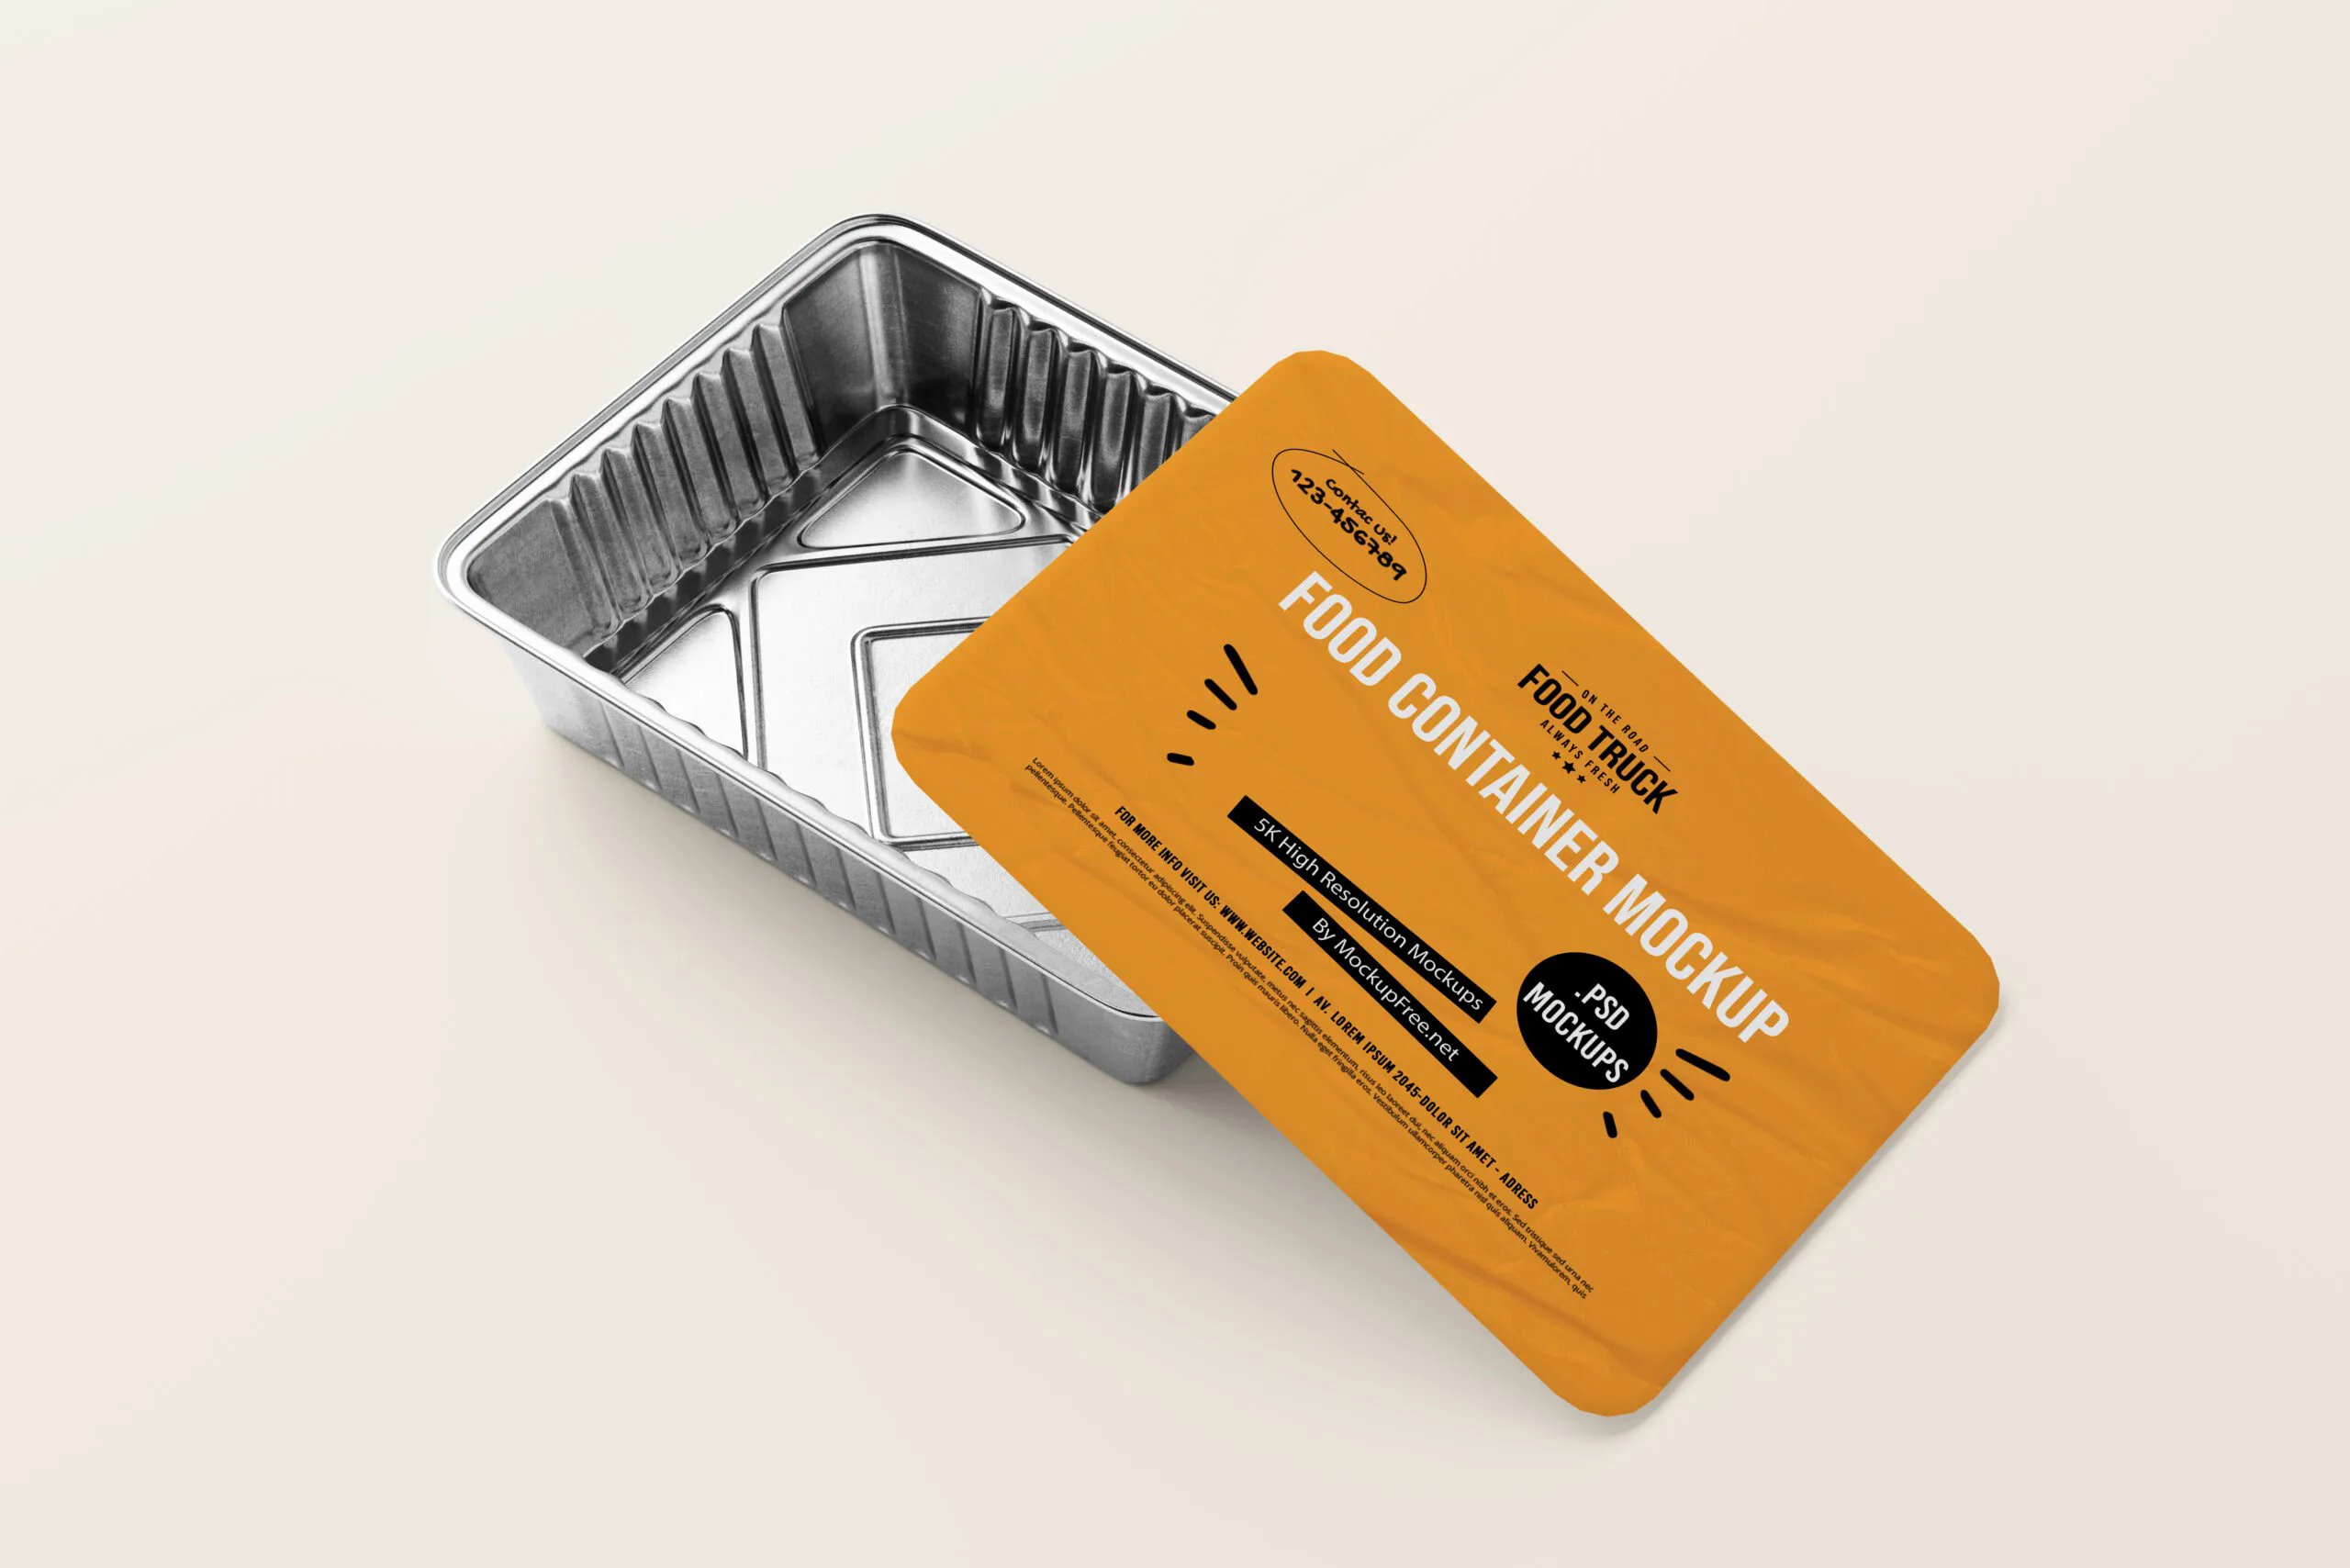 10 Mockups of Large Aluminum Food Container Boxes FREE PSD